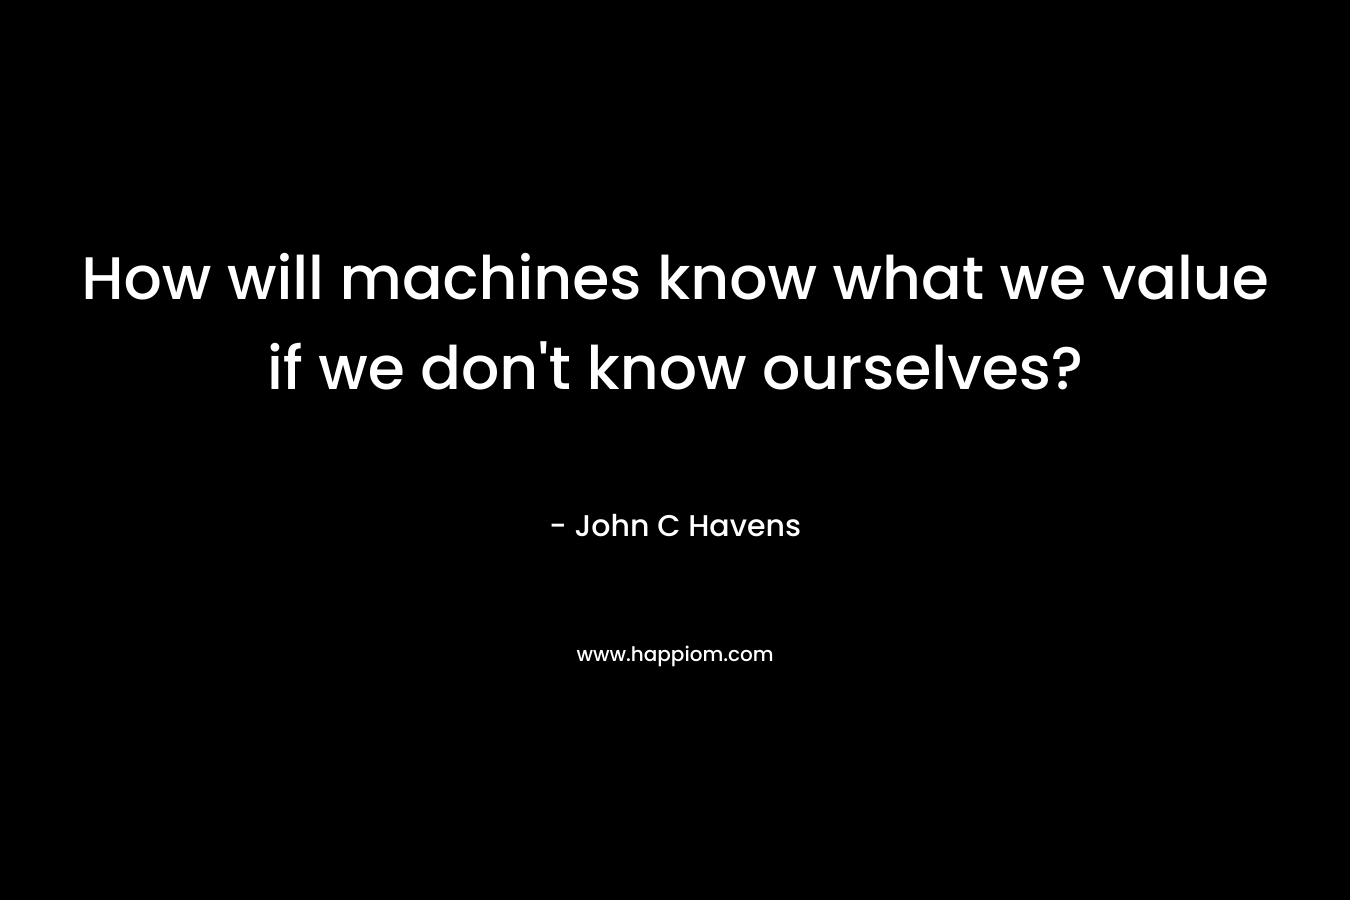 How will machines know what we value if we don’t know ourselves? – John C Havens